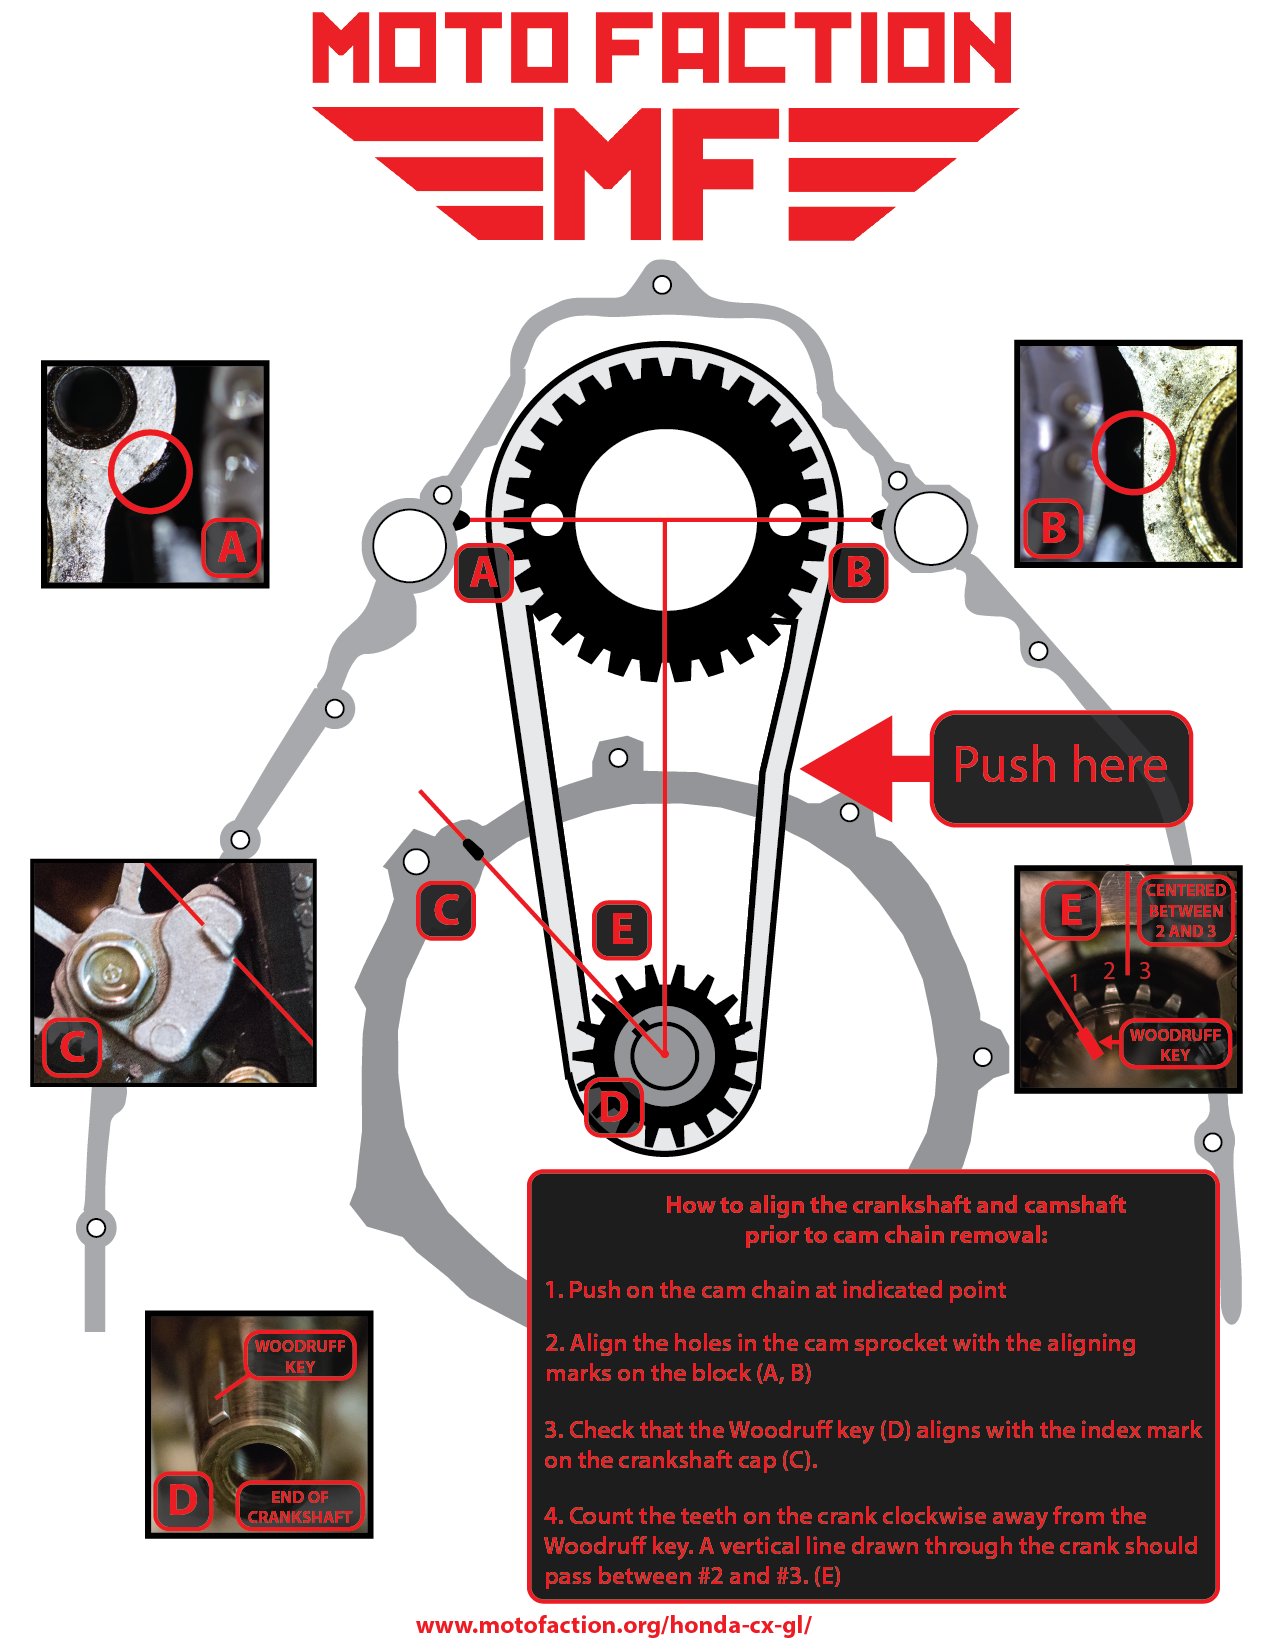 Here is an infographic showing how to set the valve timing on a Honda CX500, GL500, CX650 or GL650 motorcycle as featured on MotoFaction.org.